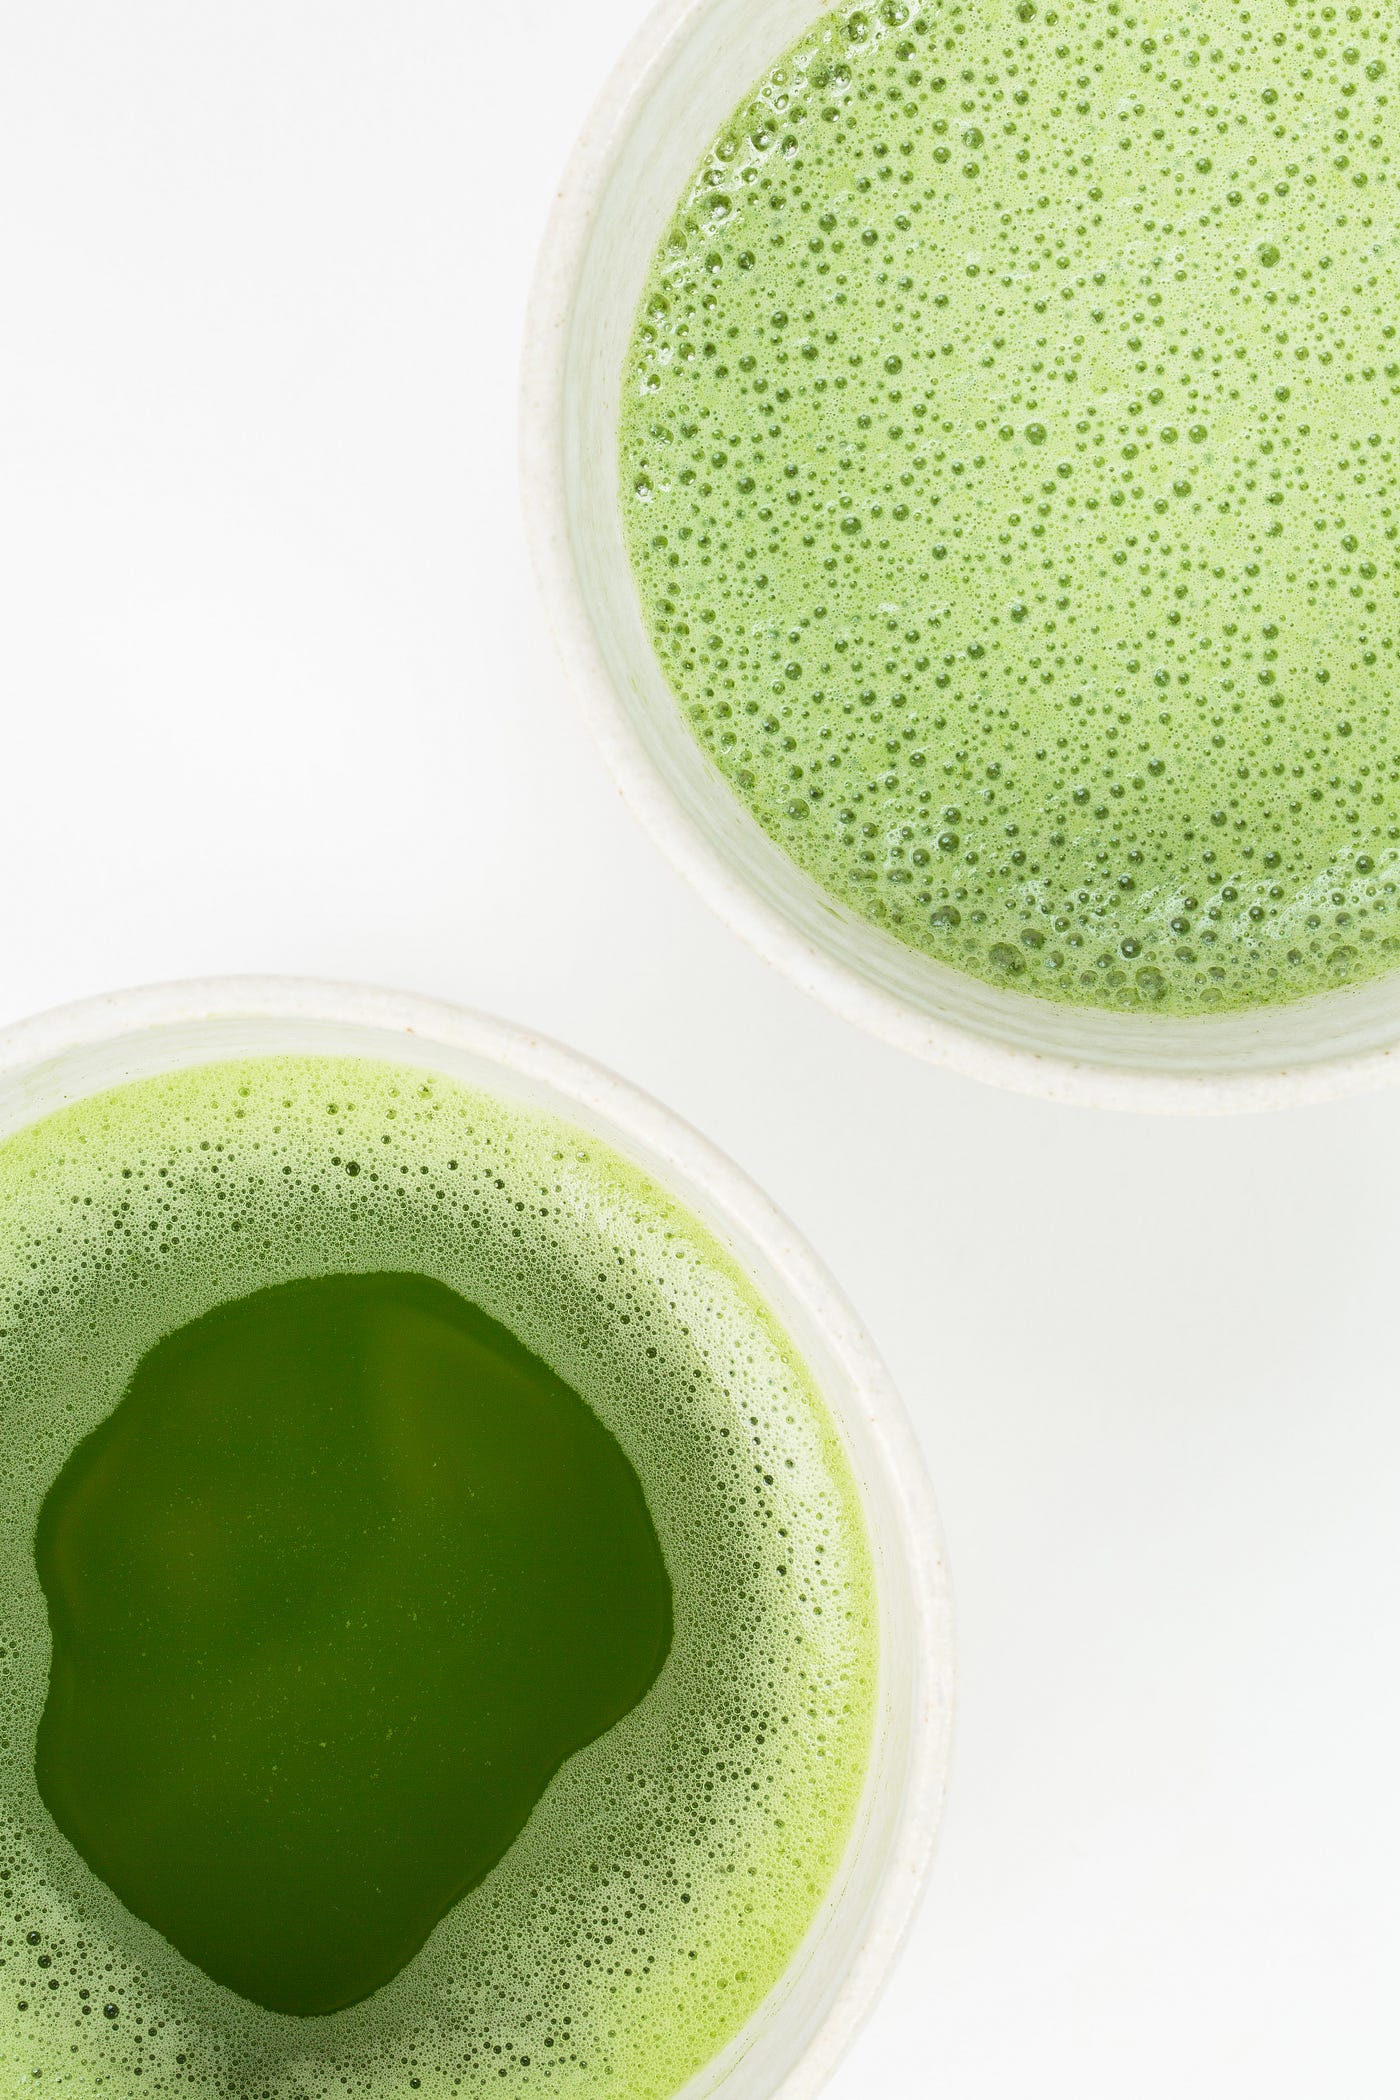 Two cups of green tea, slightly foamy (tiny bubbles). One sits in the upper right of the image, the other in the lower left. We see the cups from above. White background.